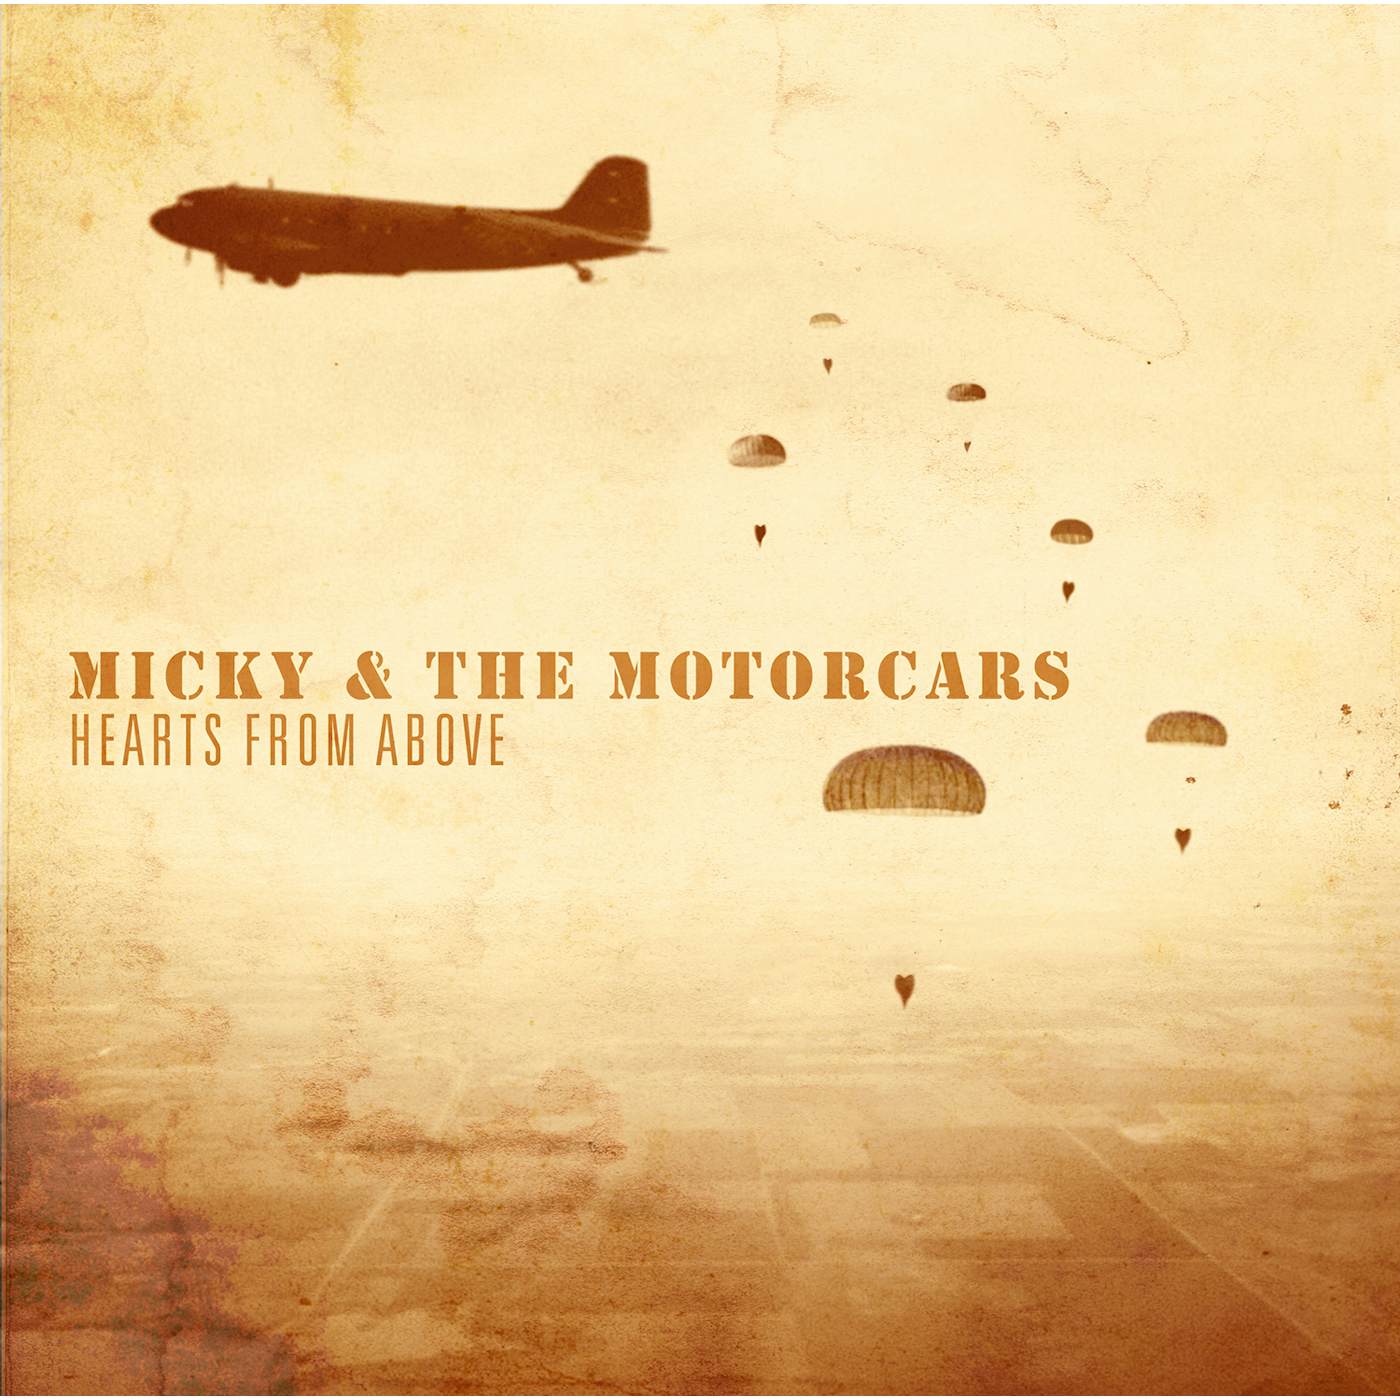 Micky & The Motorcars HEARTS FROM ABOVE CD